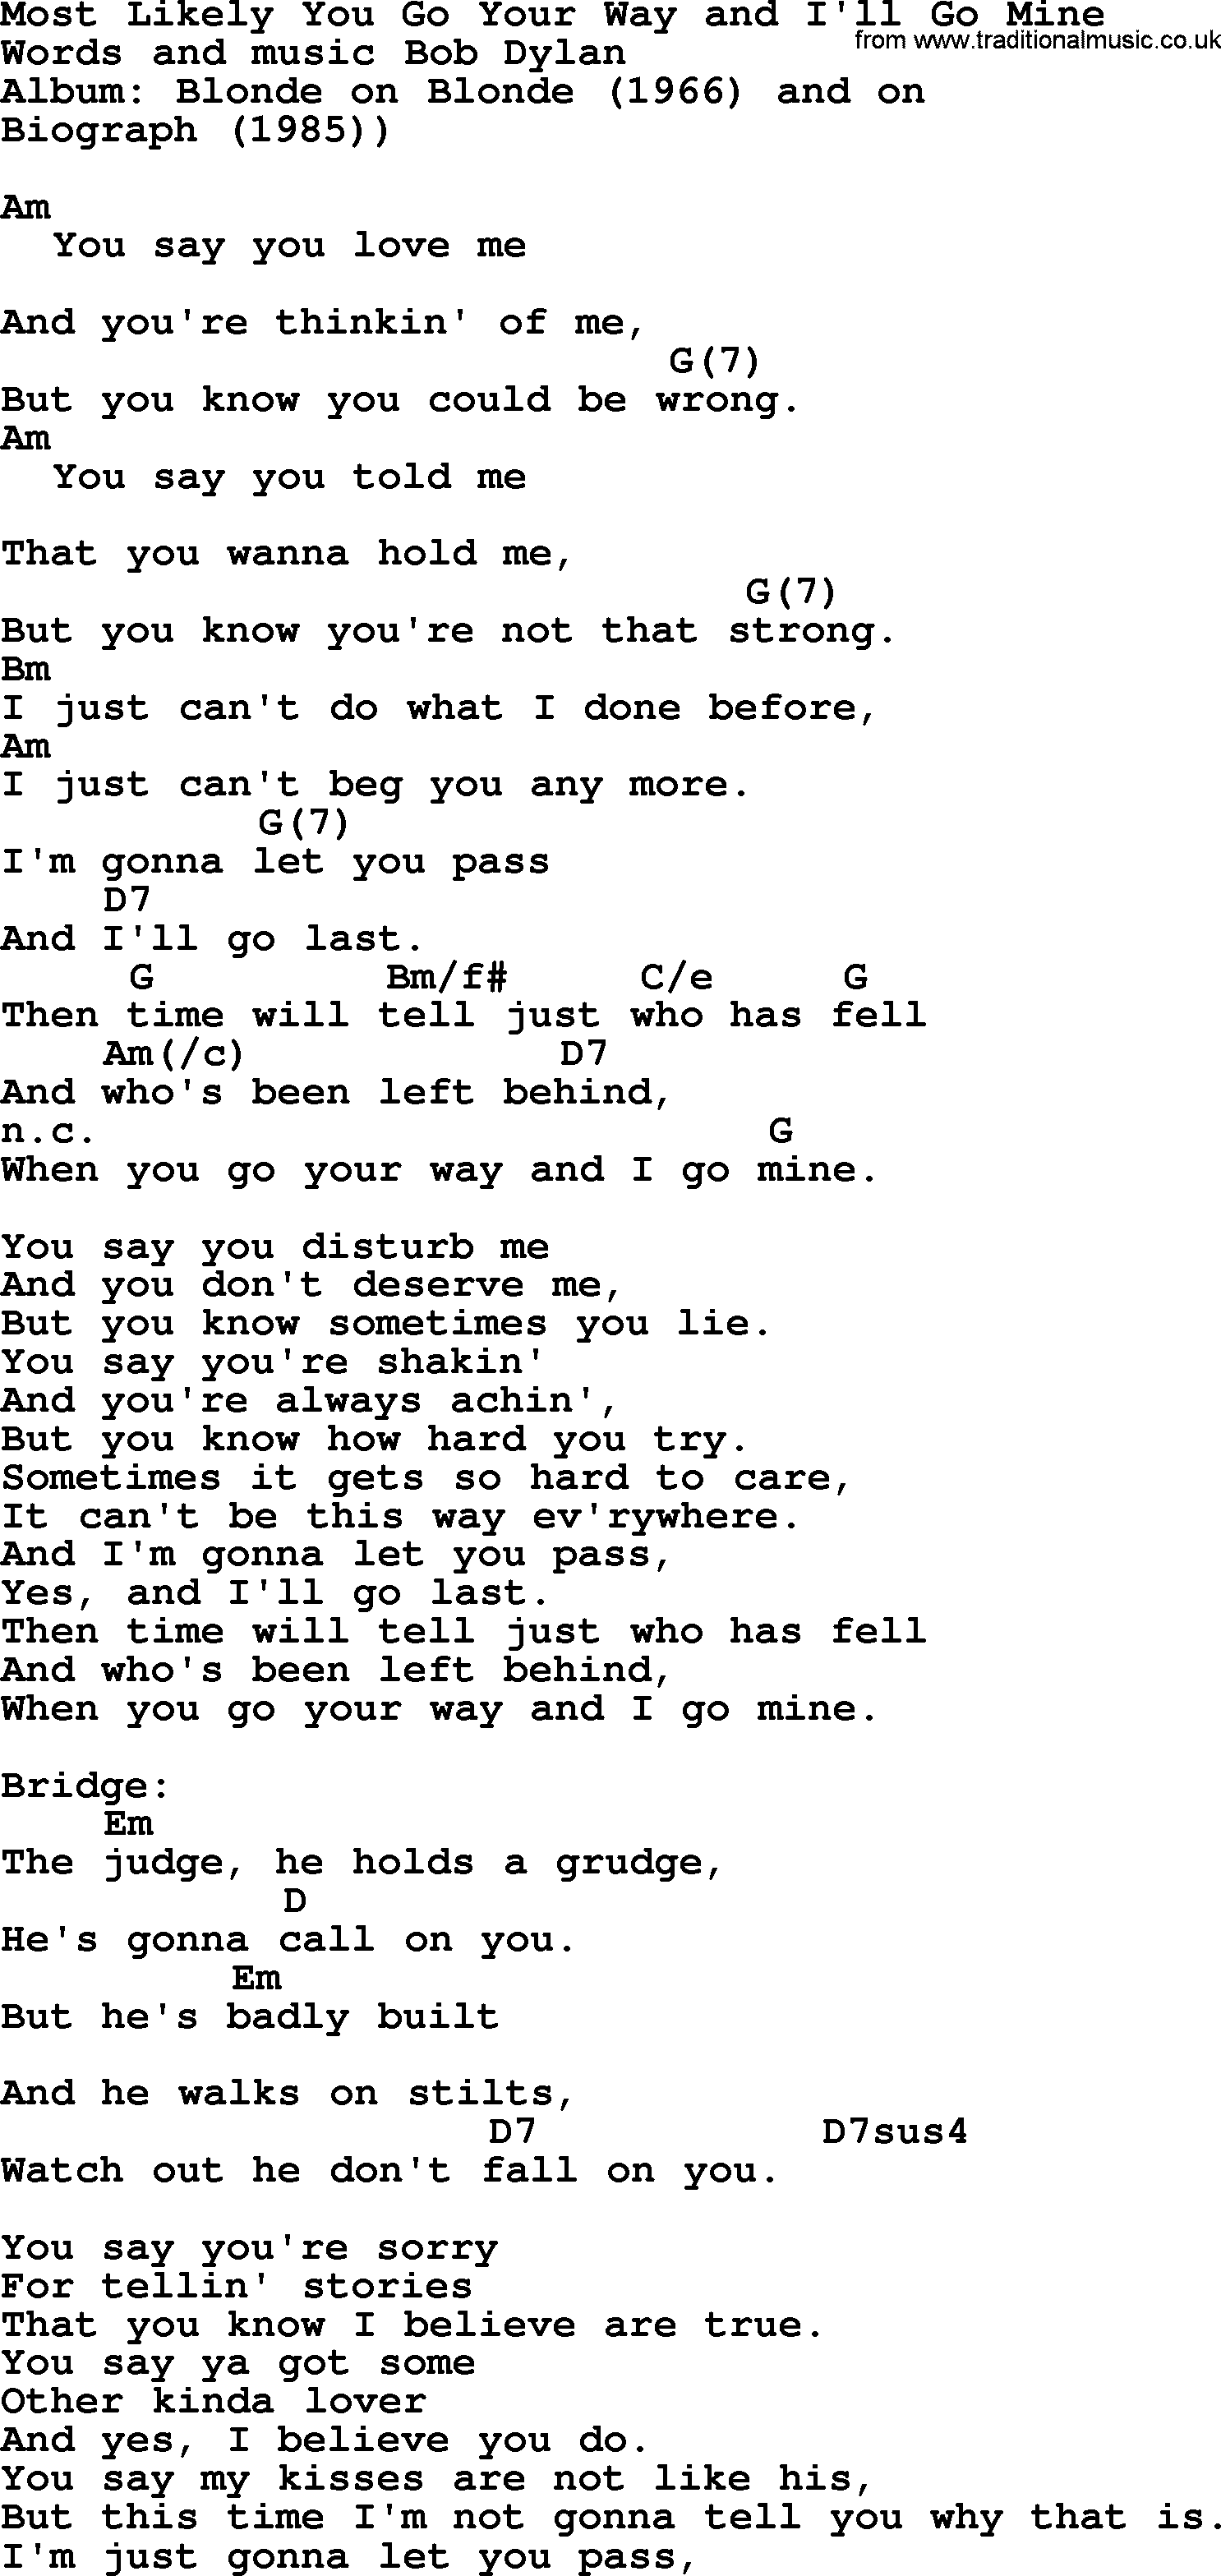 Bob Dylan song, lyrics with chords - Most Likely You Go Your Way and I'll Go Mine